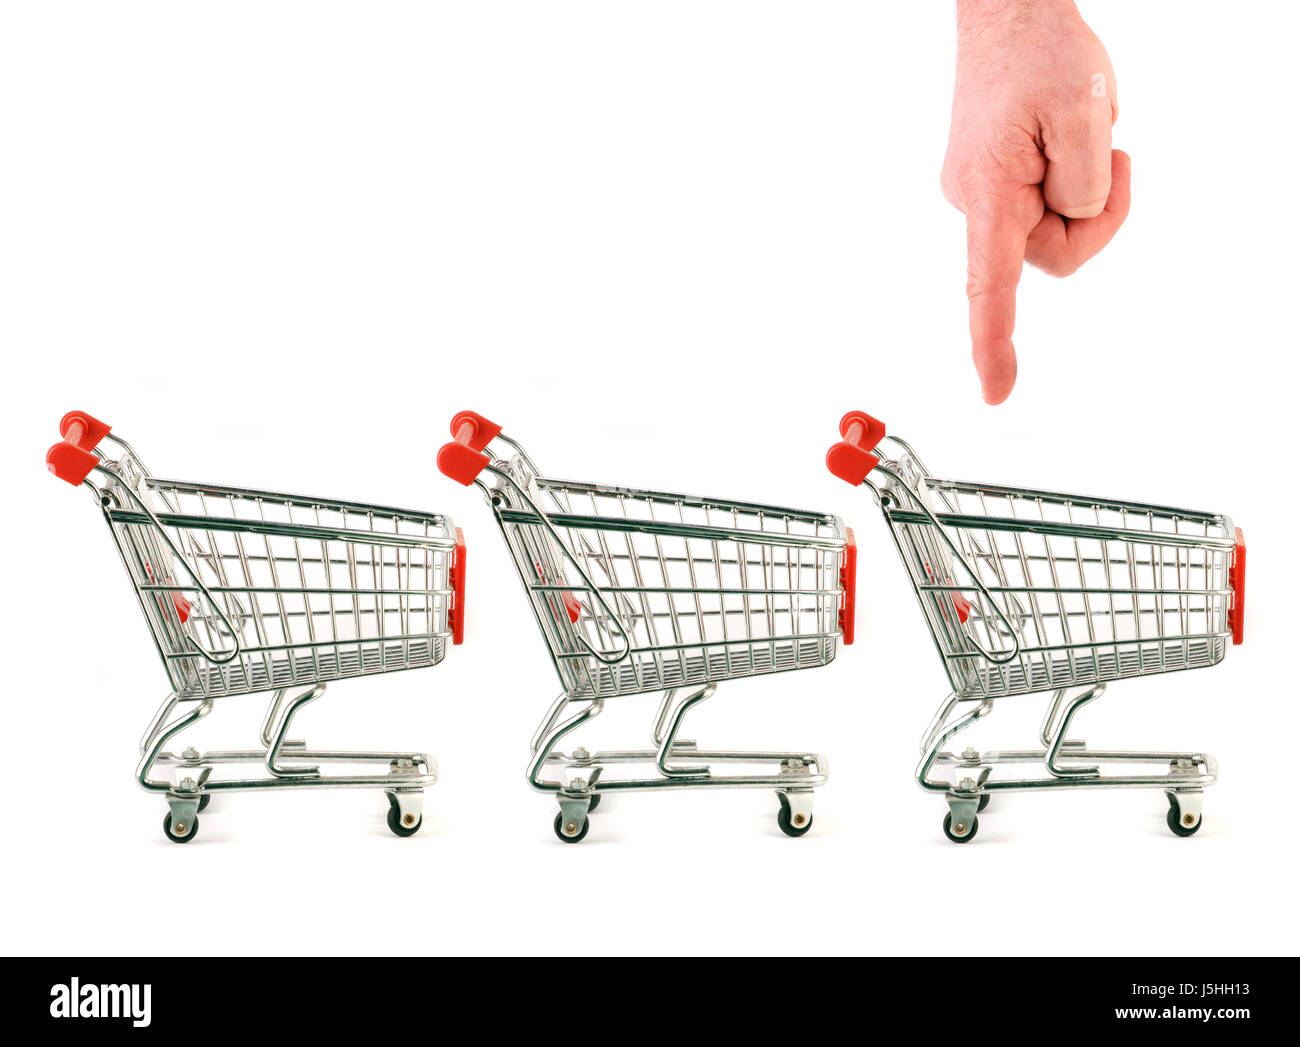 indicate show hand hands consumption shopping buy supermarket trolley cart Stock Photo